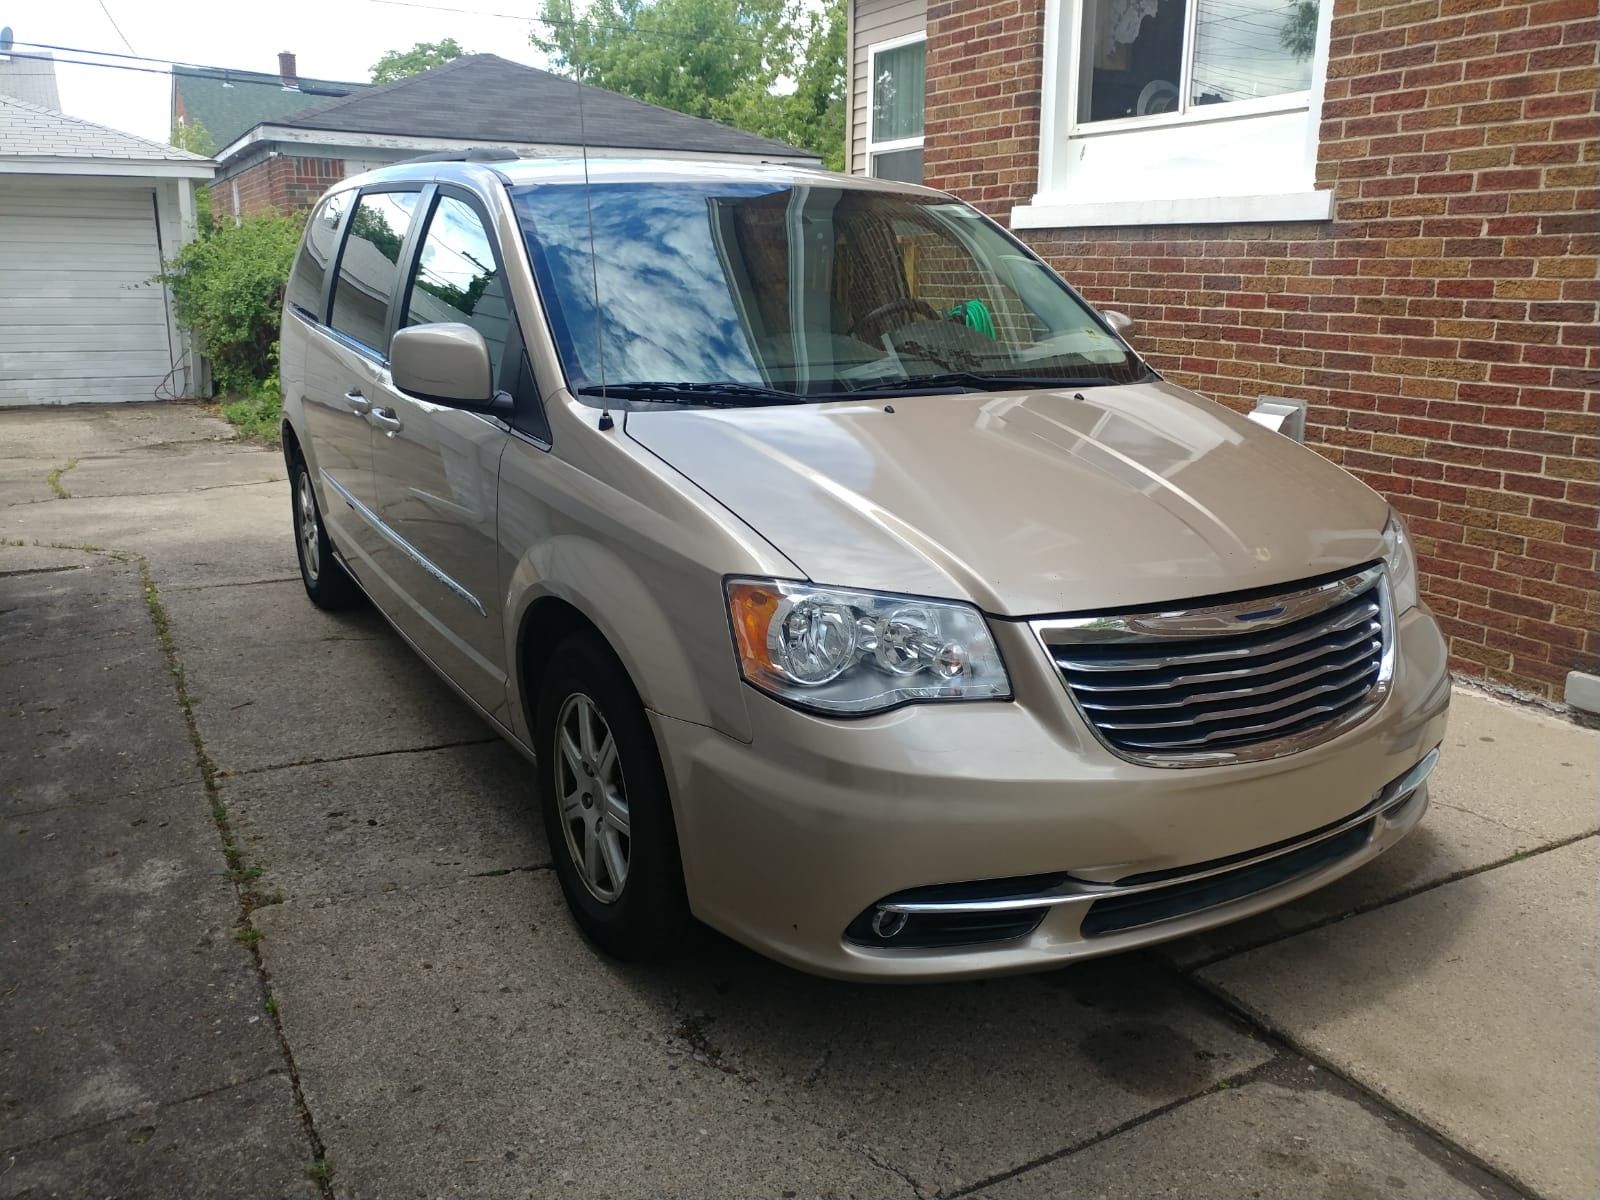 2012 Chrysler Town and Country Minivan